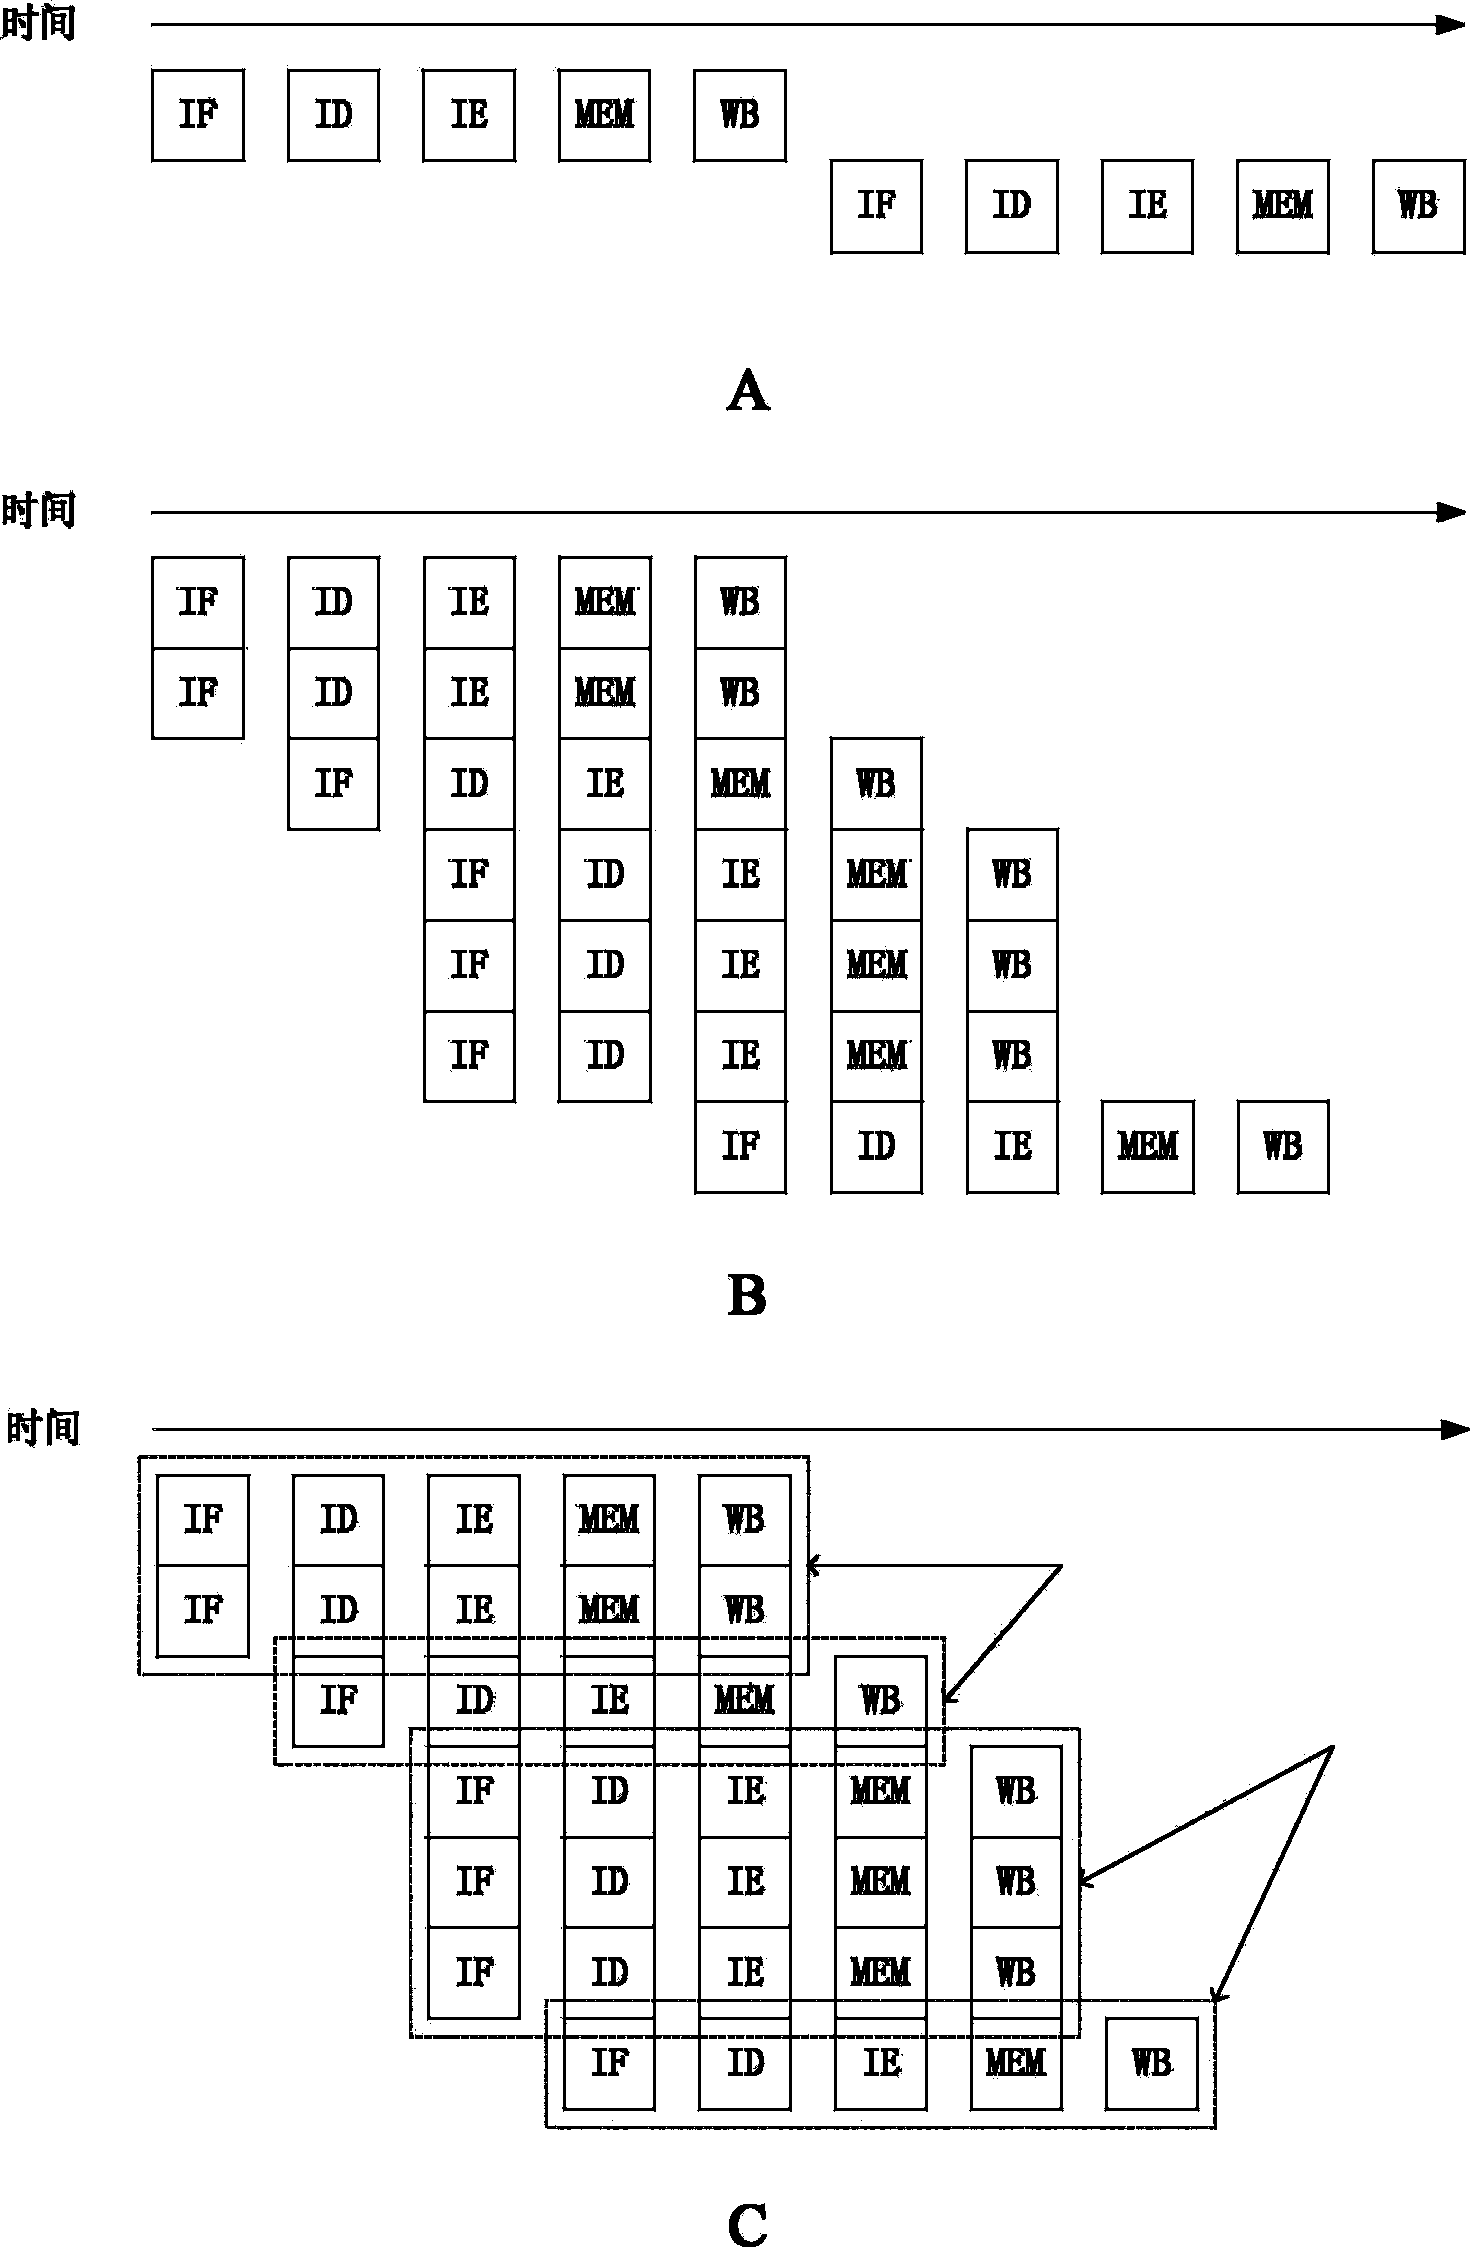 Processor Architecture and Instruction Execution Method Combining Sequence and VLIW